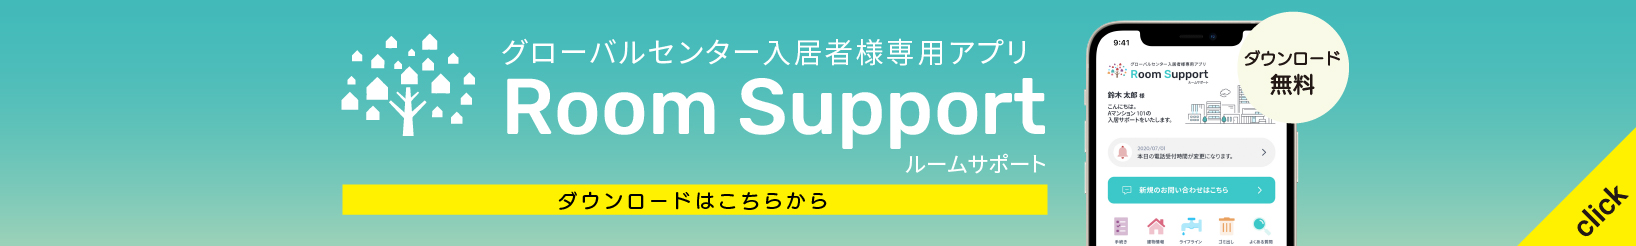 roomsupportバナー